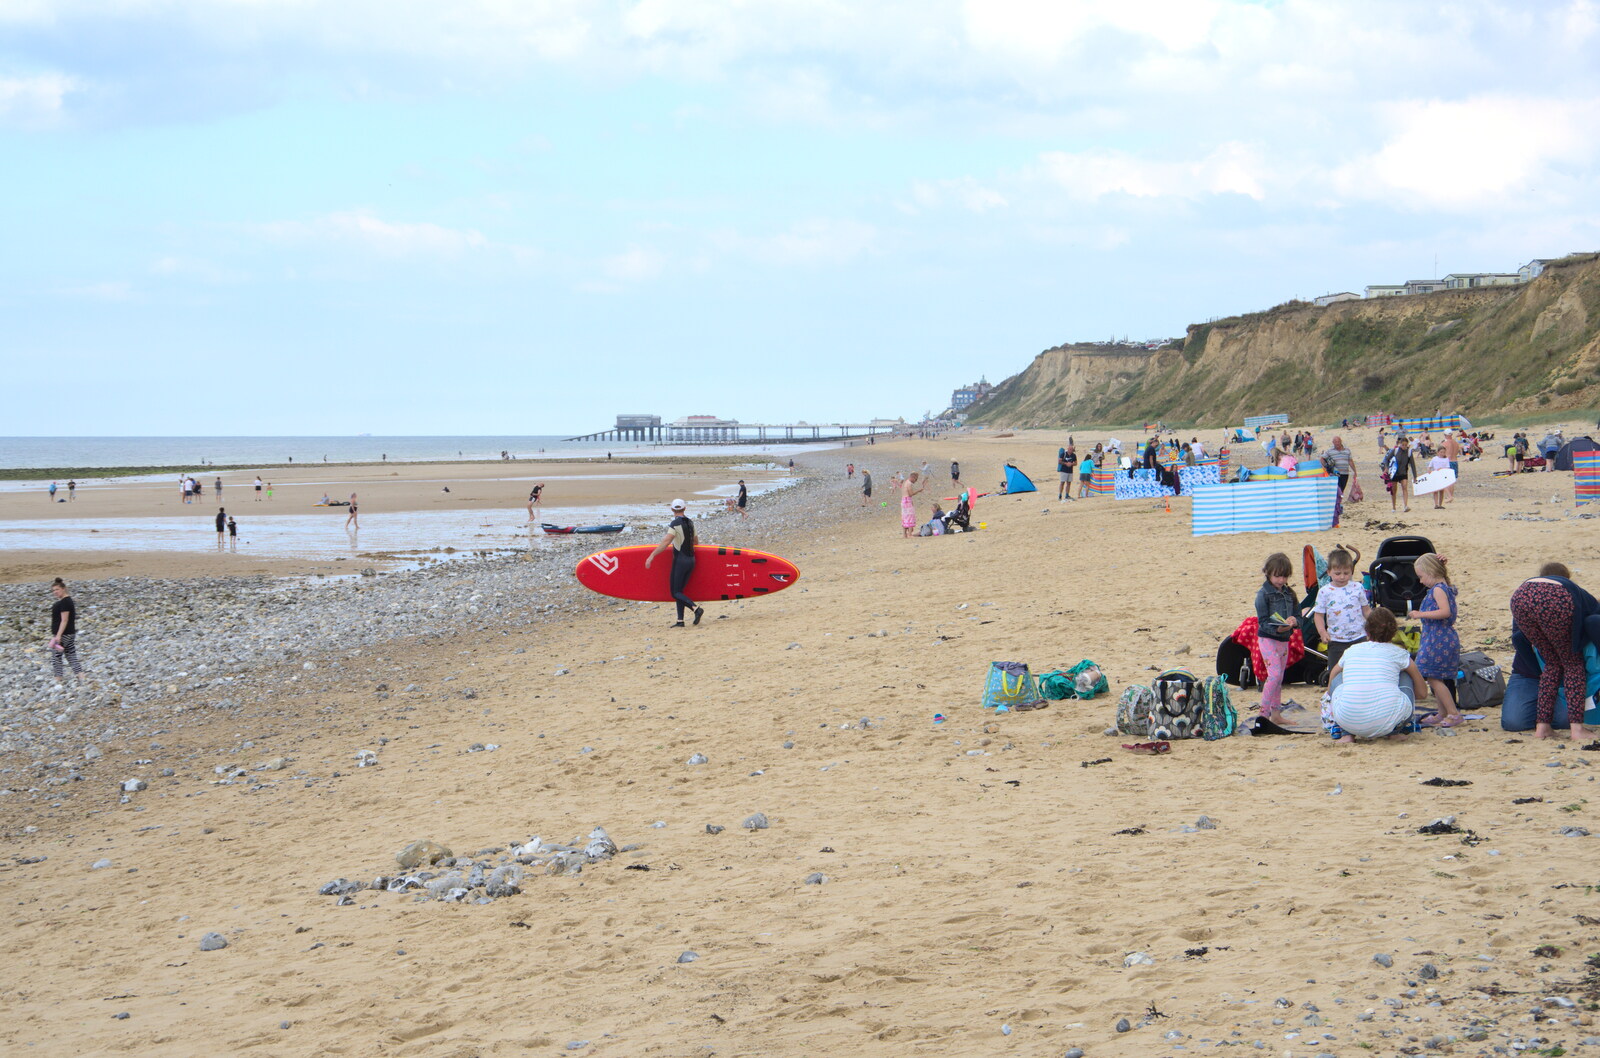 A surfer hauls out to sea from Camping on the Coast, East Runton, North Norfolk - 25th July 2020